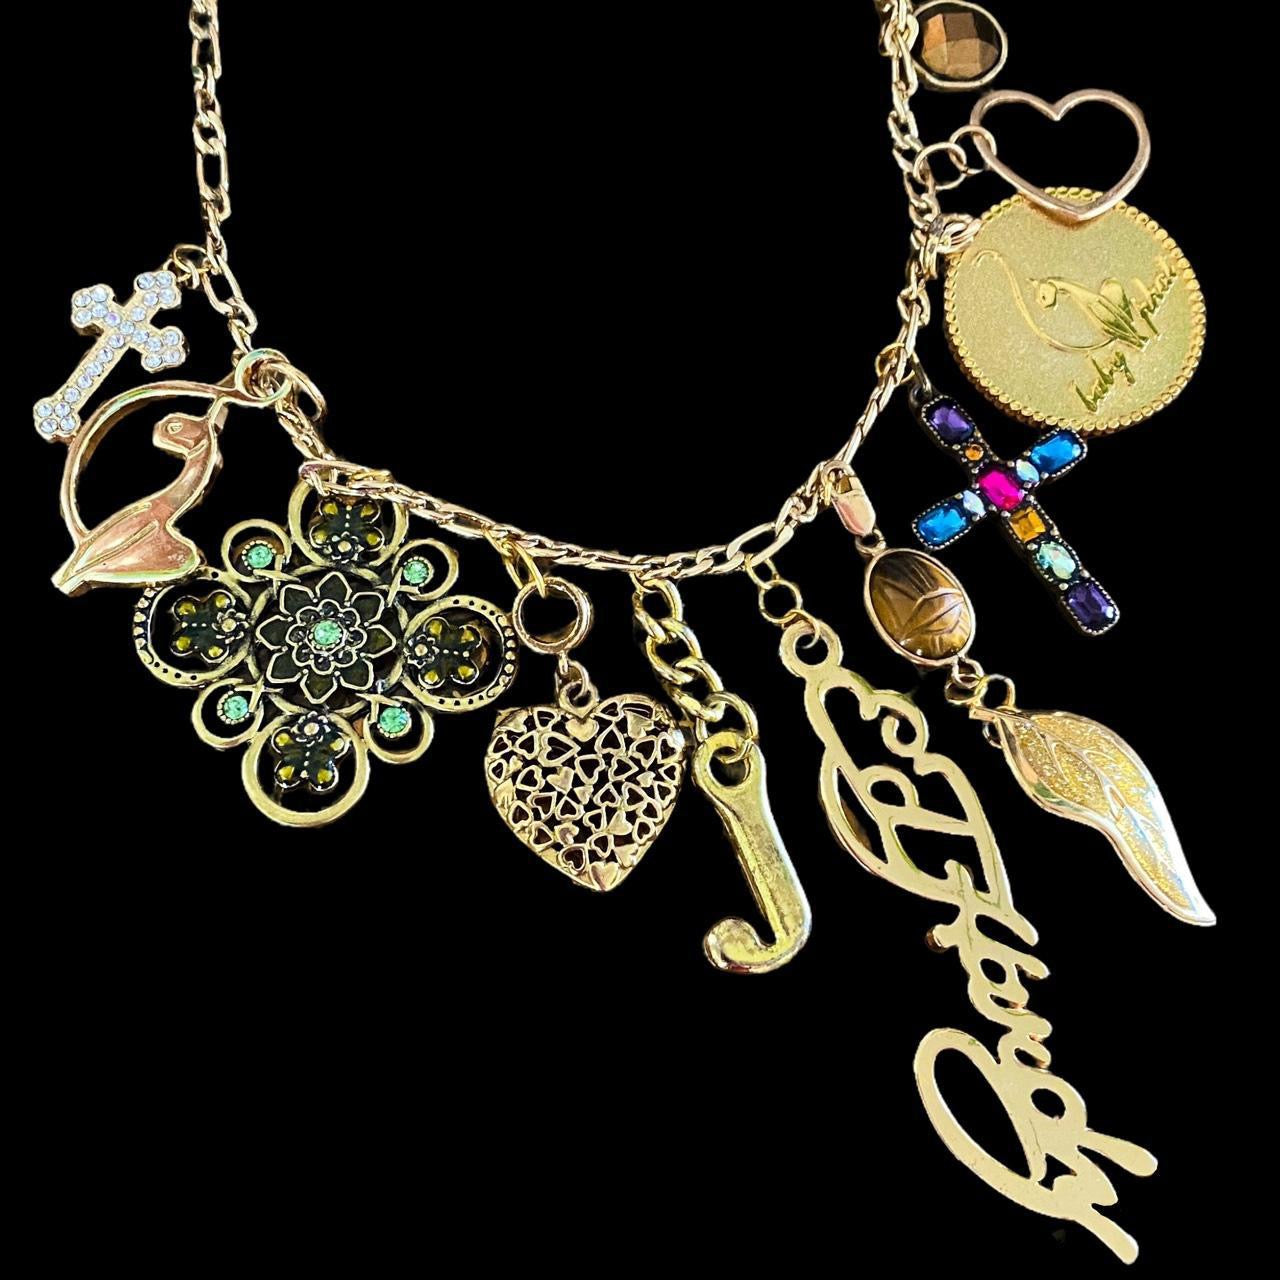 Reworked Vintage Charm Necklace